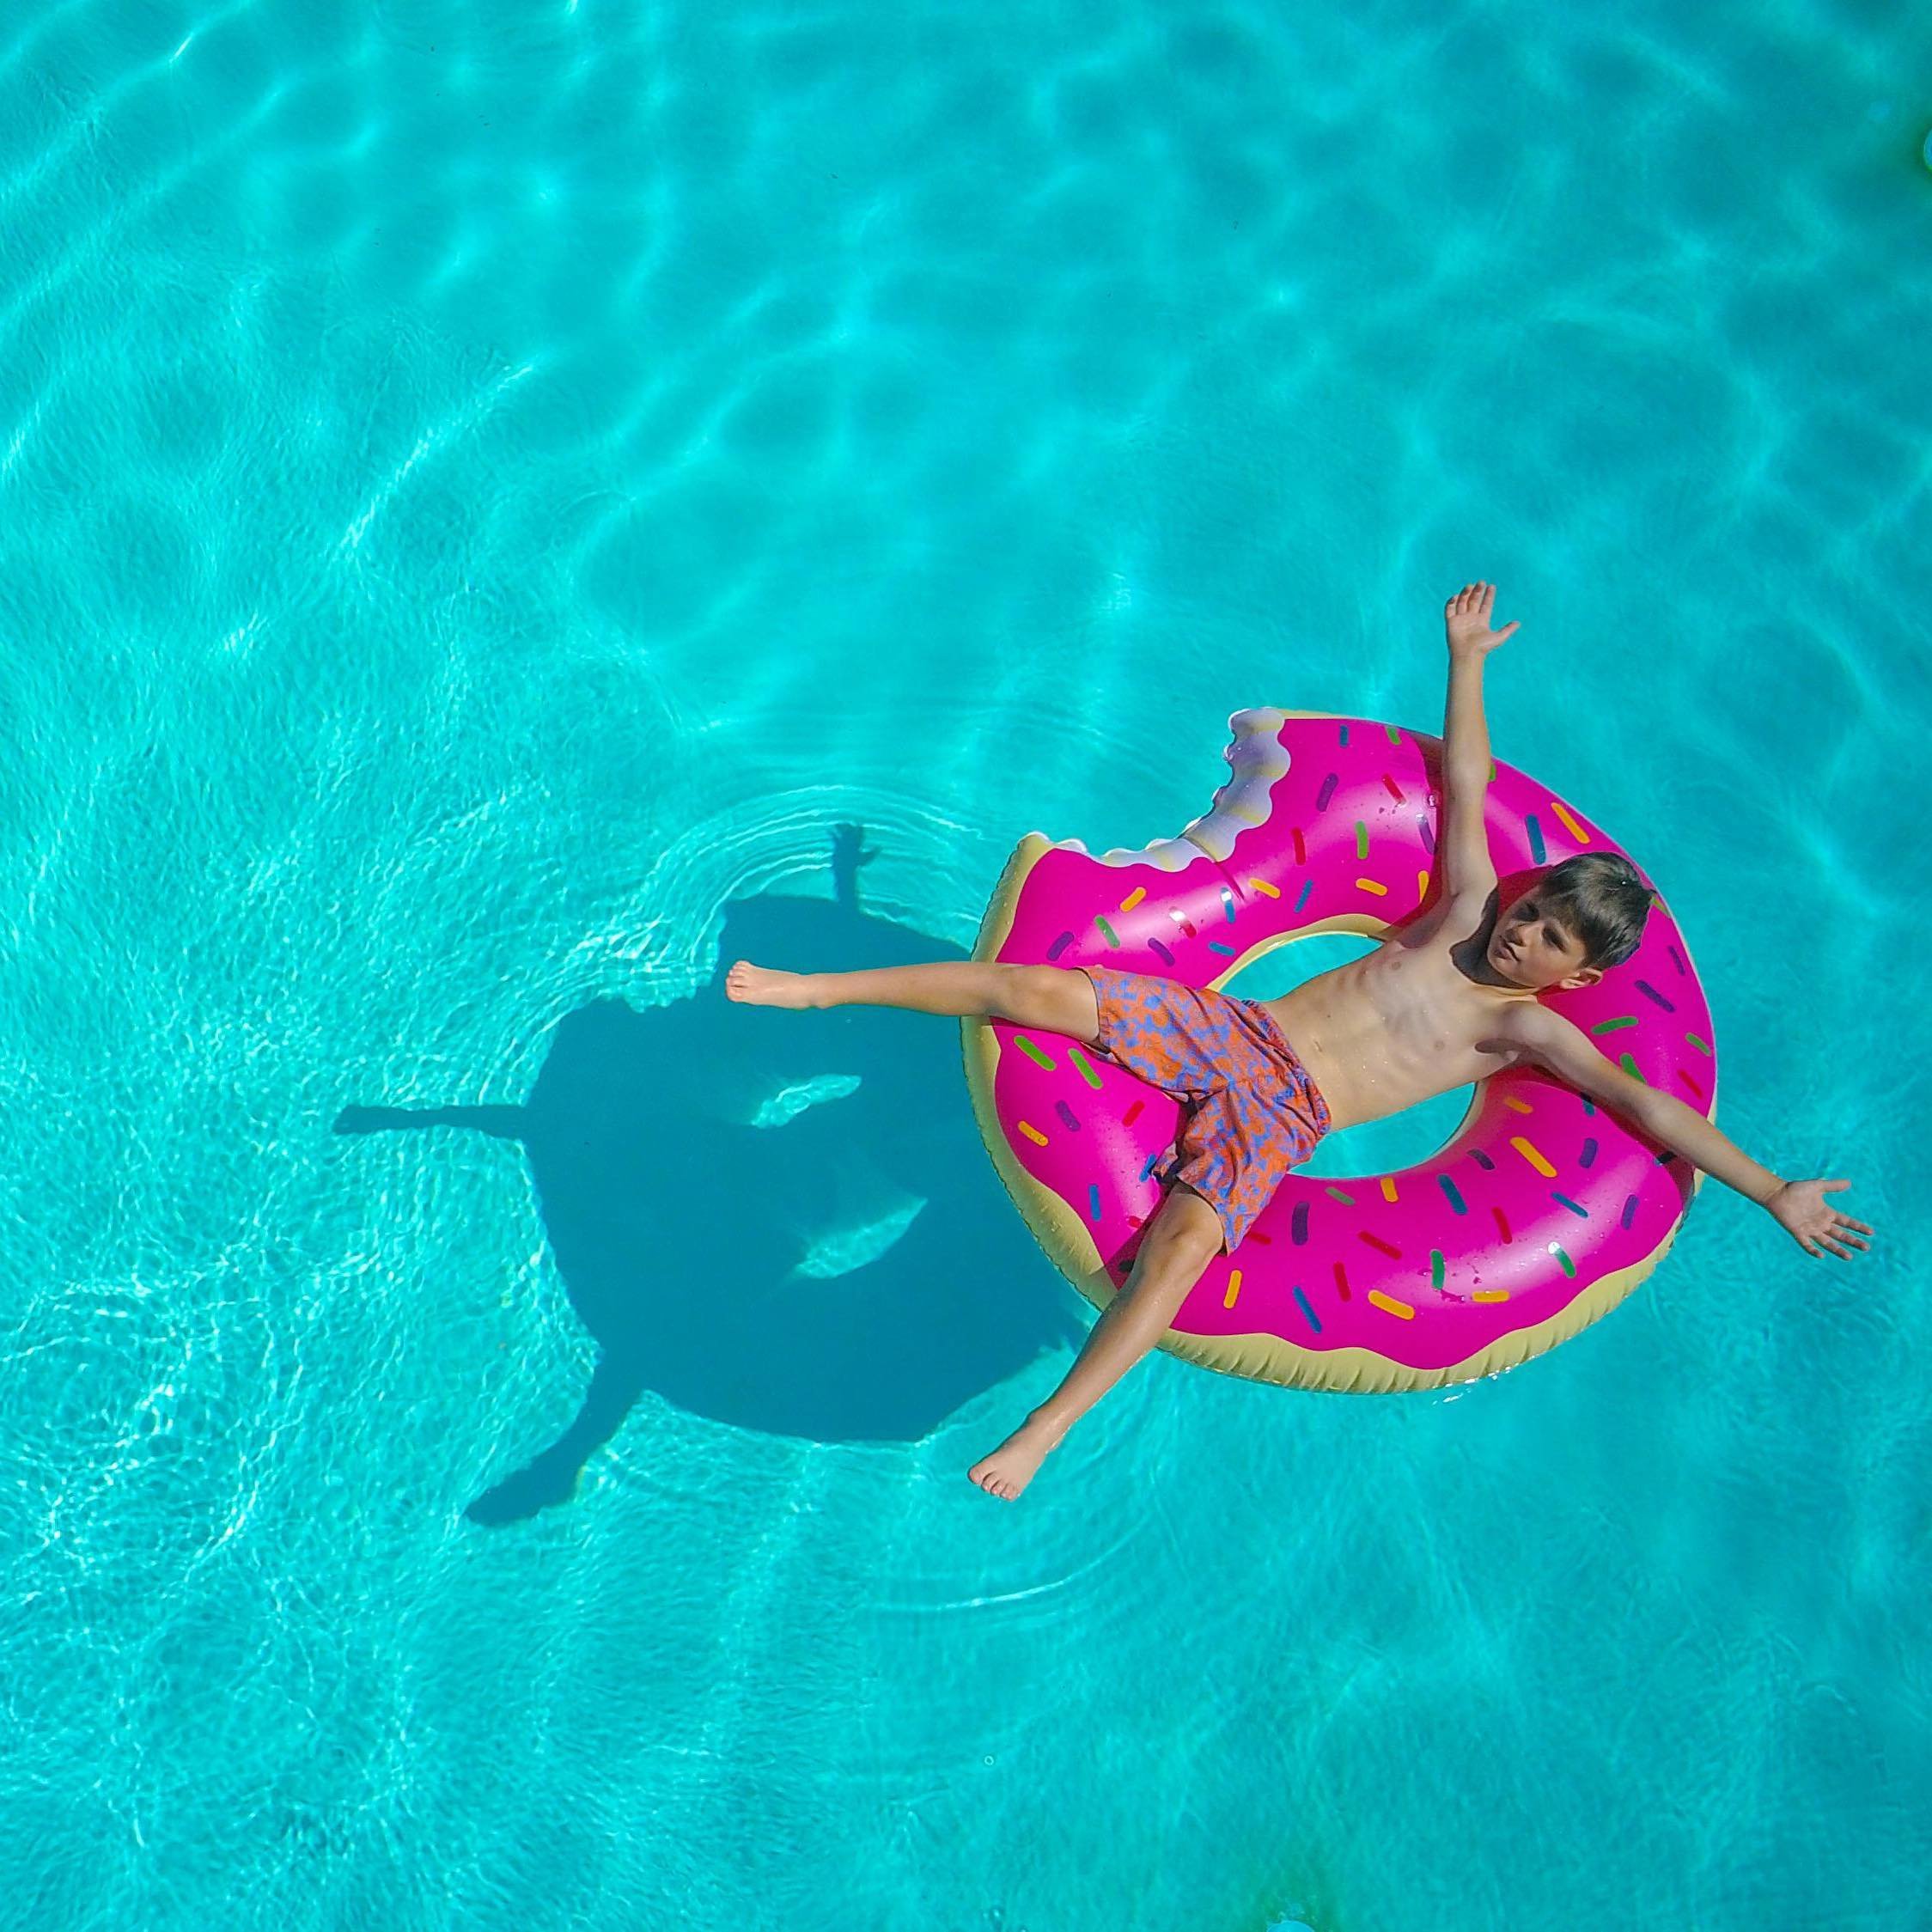 Summer will soon be in full swing, and your dream pool is just a call away! At Blue Springs Pool &amp; Construction we turn your backyard into a stunning oasis. Whether it&rsquo;s a custom pool, an elegant patio, or a complete backyard makeover, our 